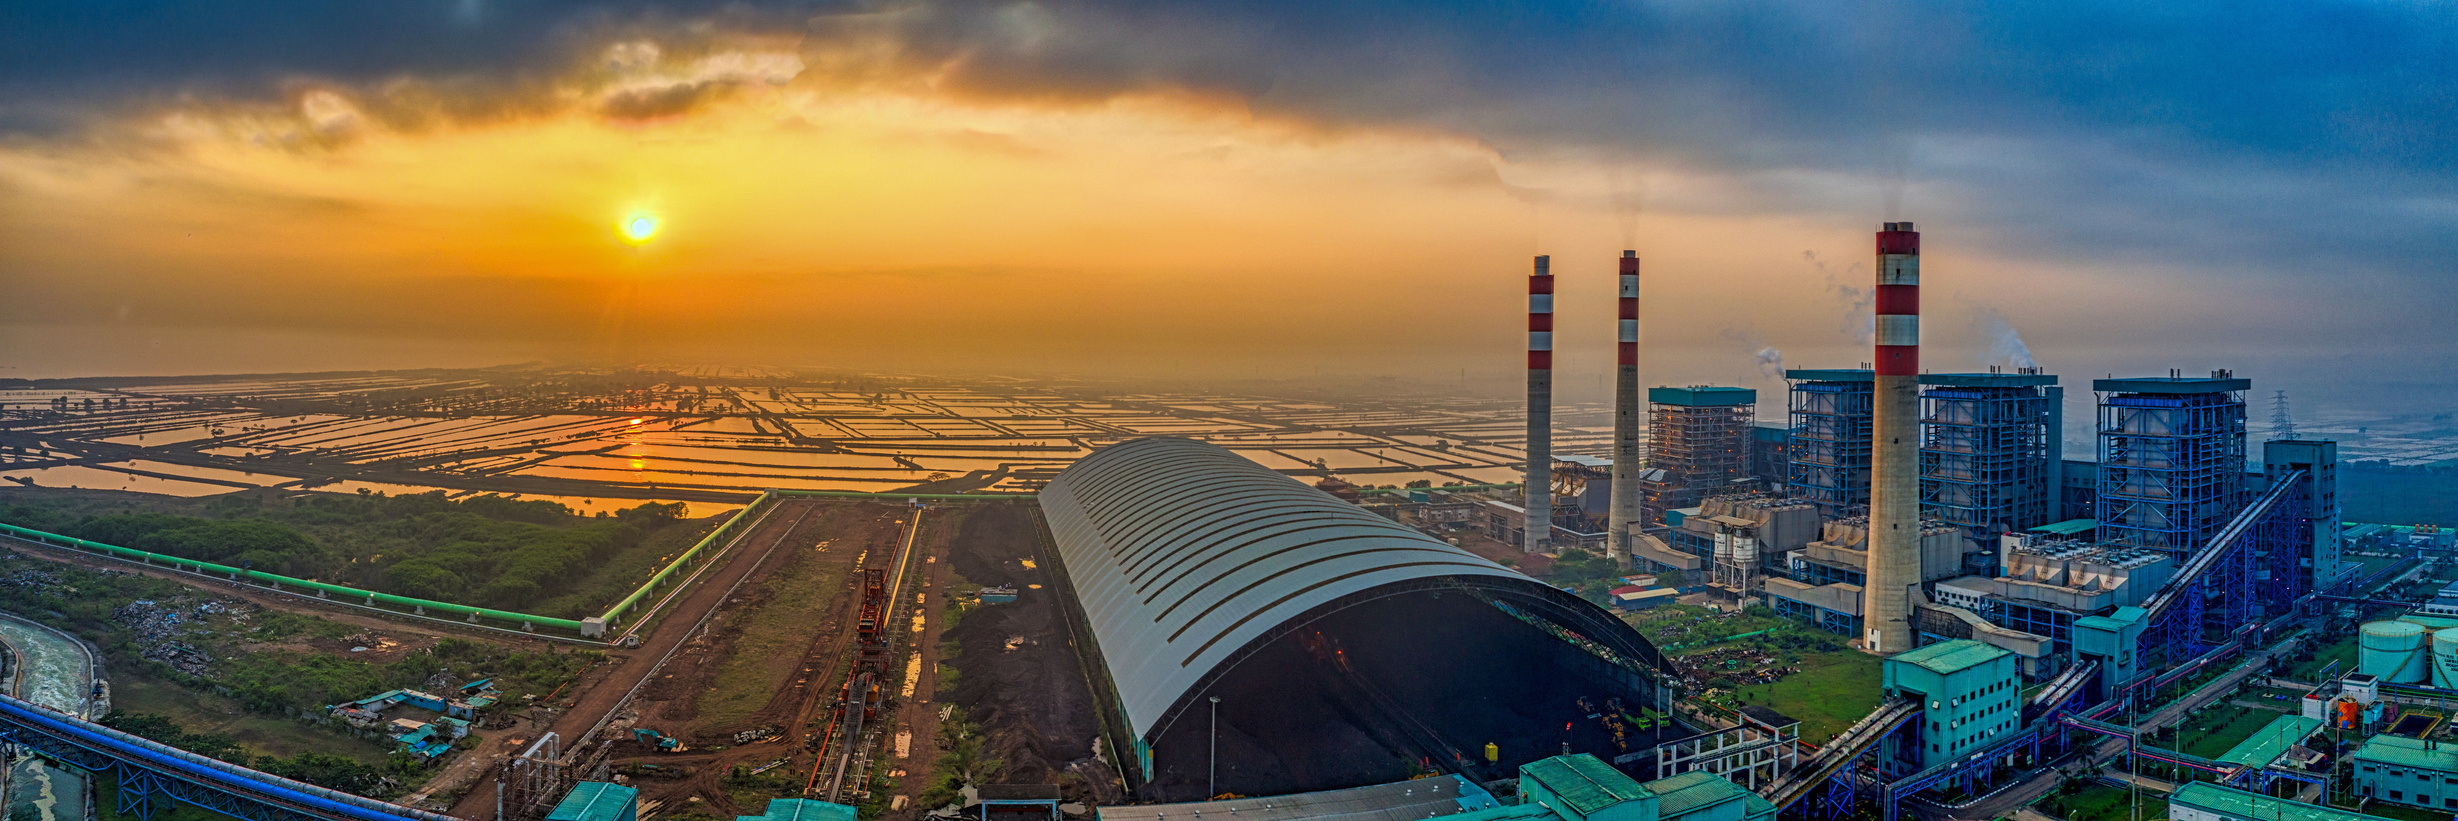 Electrical Power Plant at Sunrise